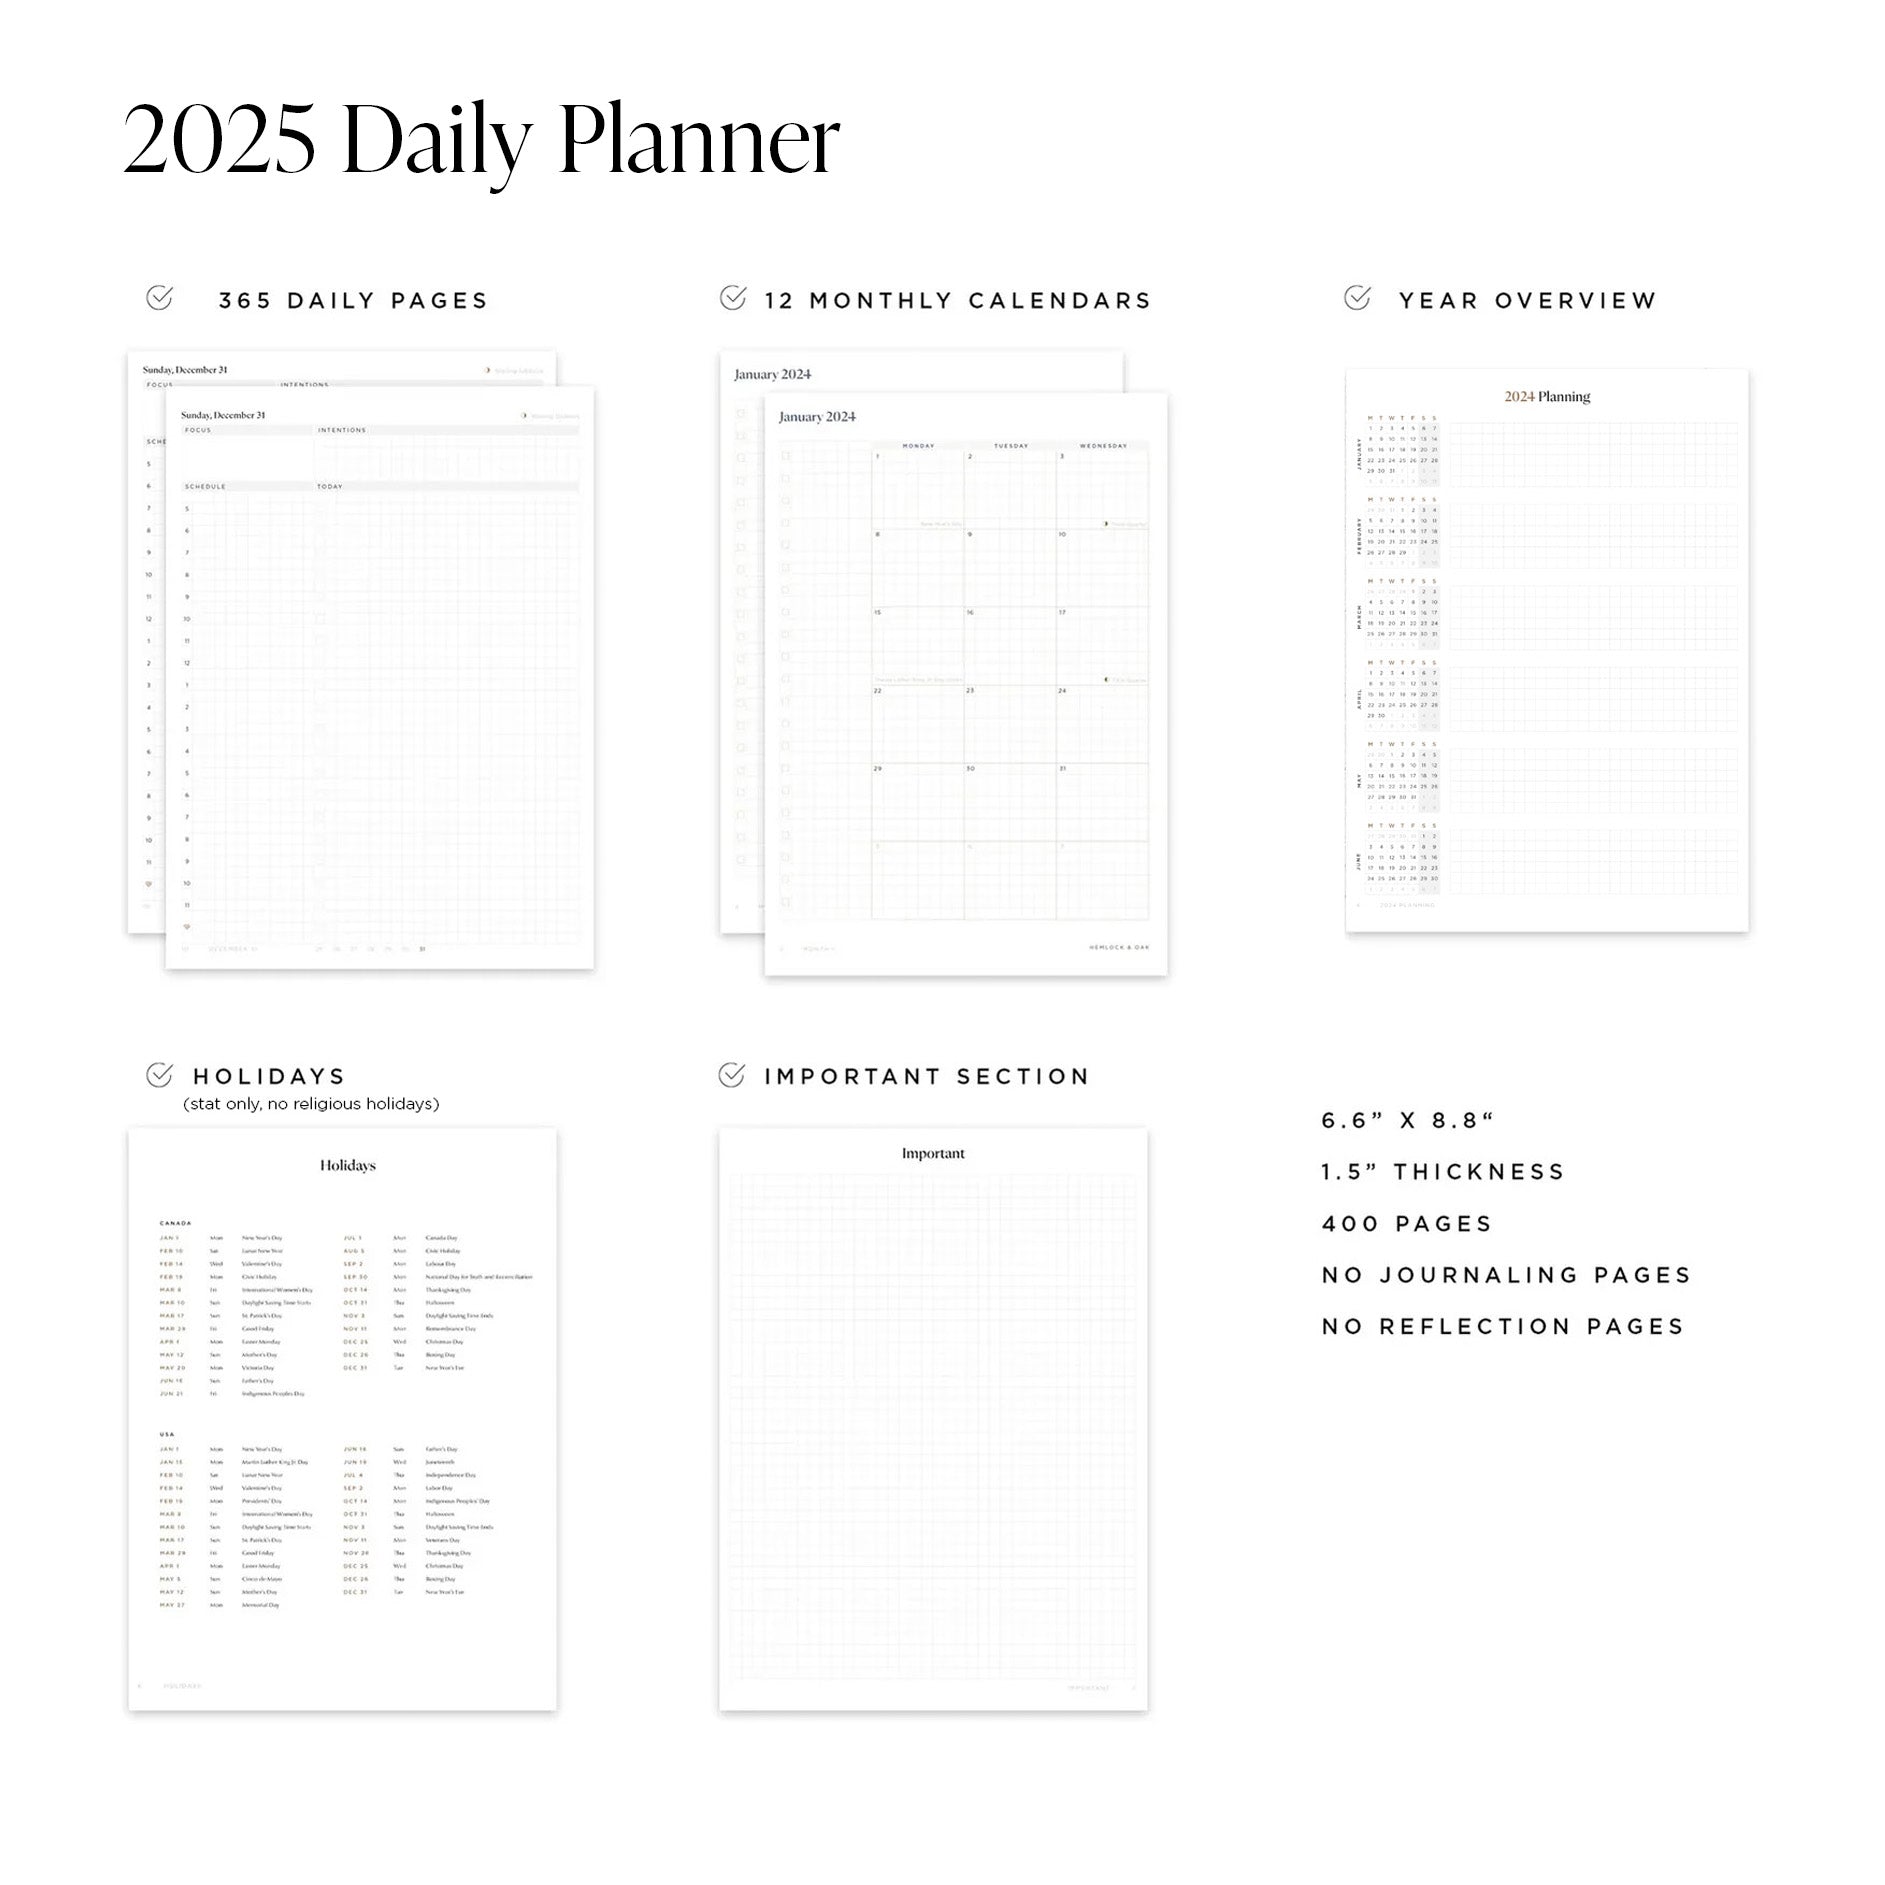 2025 Daily Planner